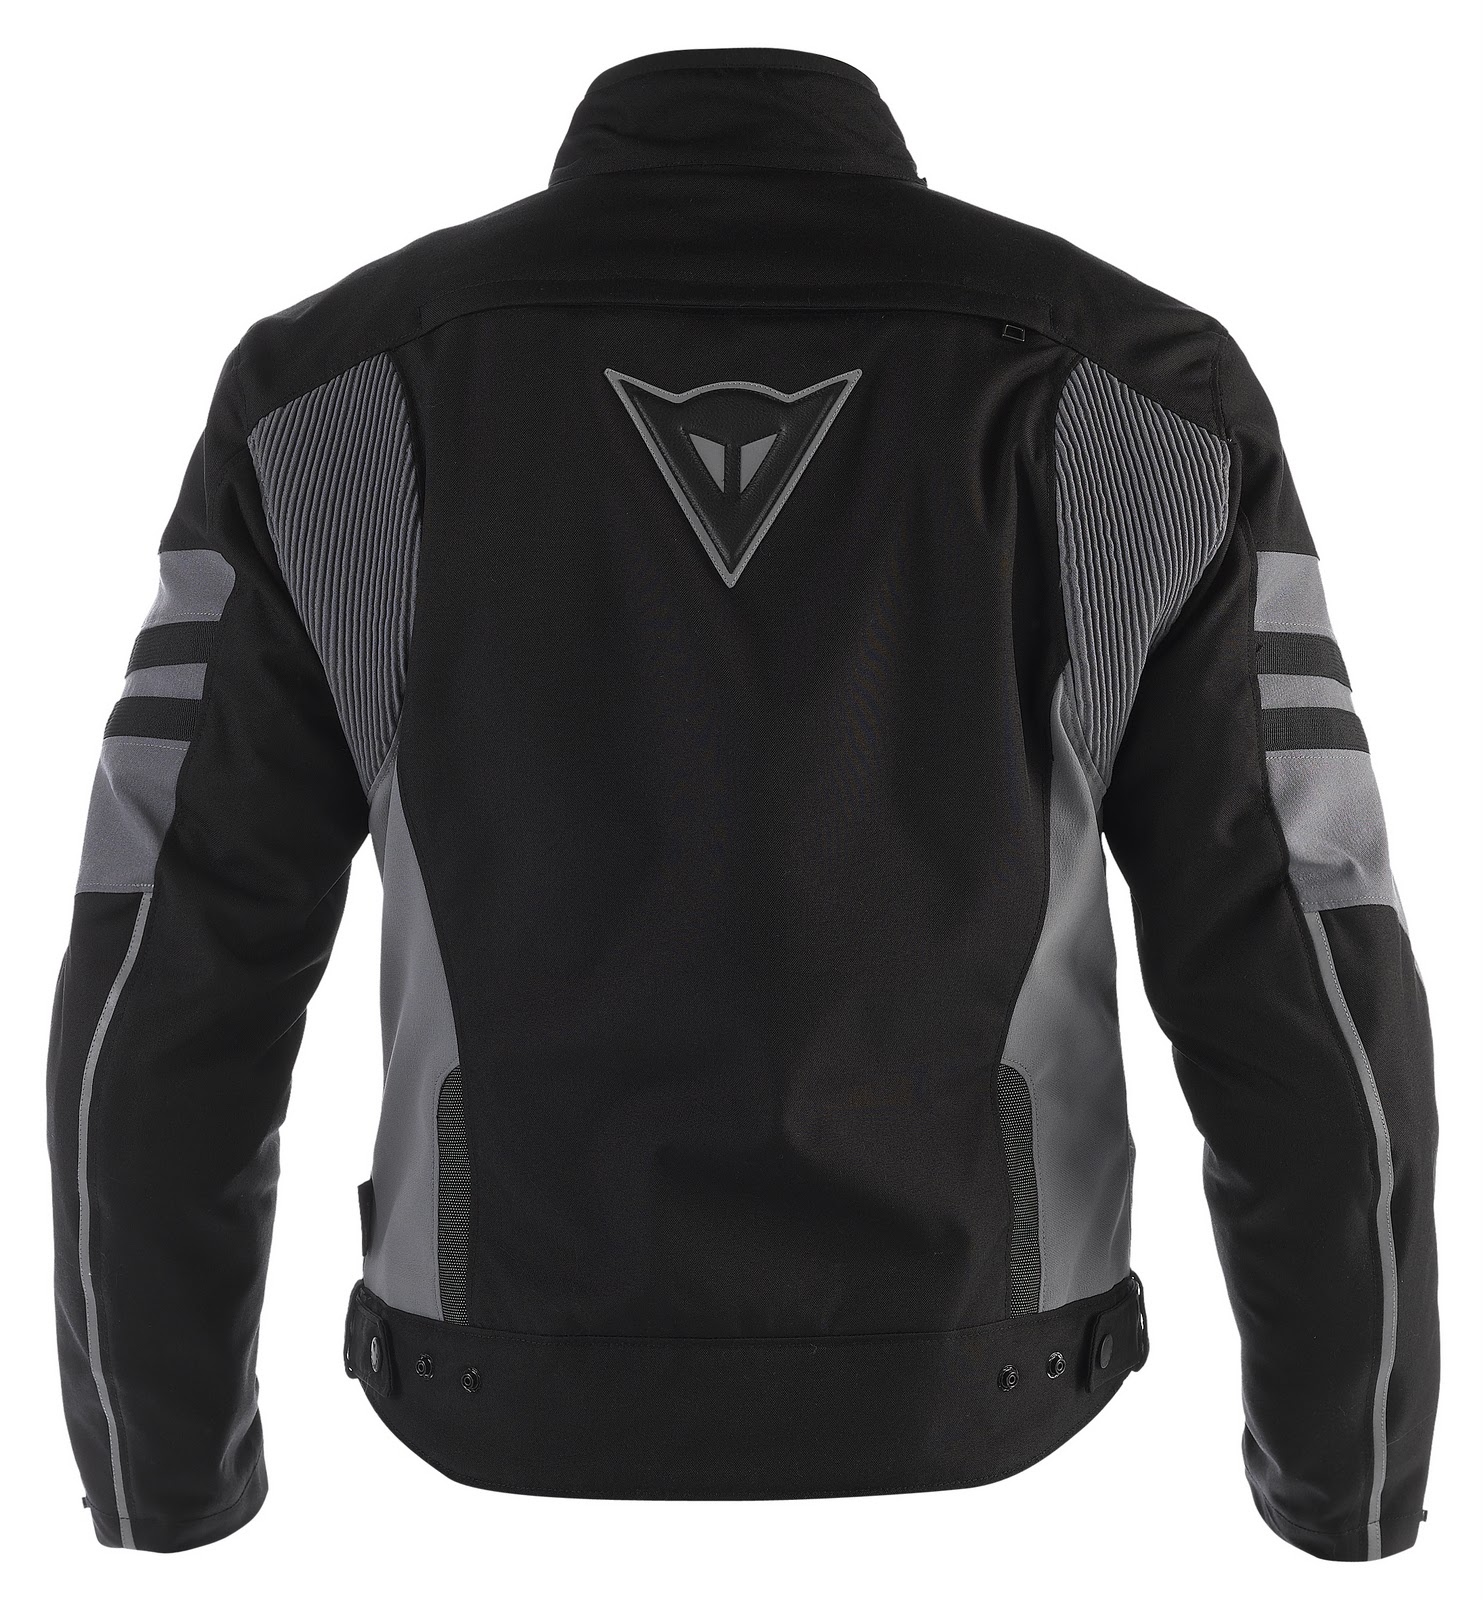 Dainese Xantum D-Dry Jacket Review